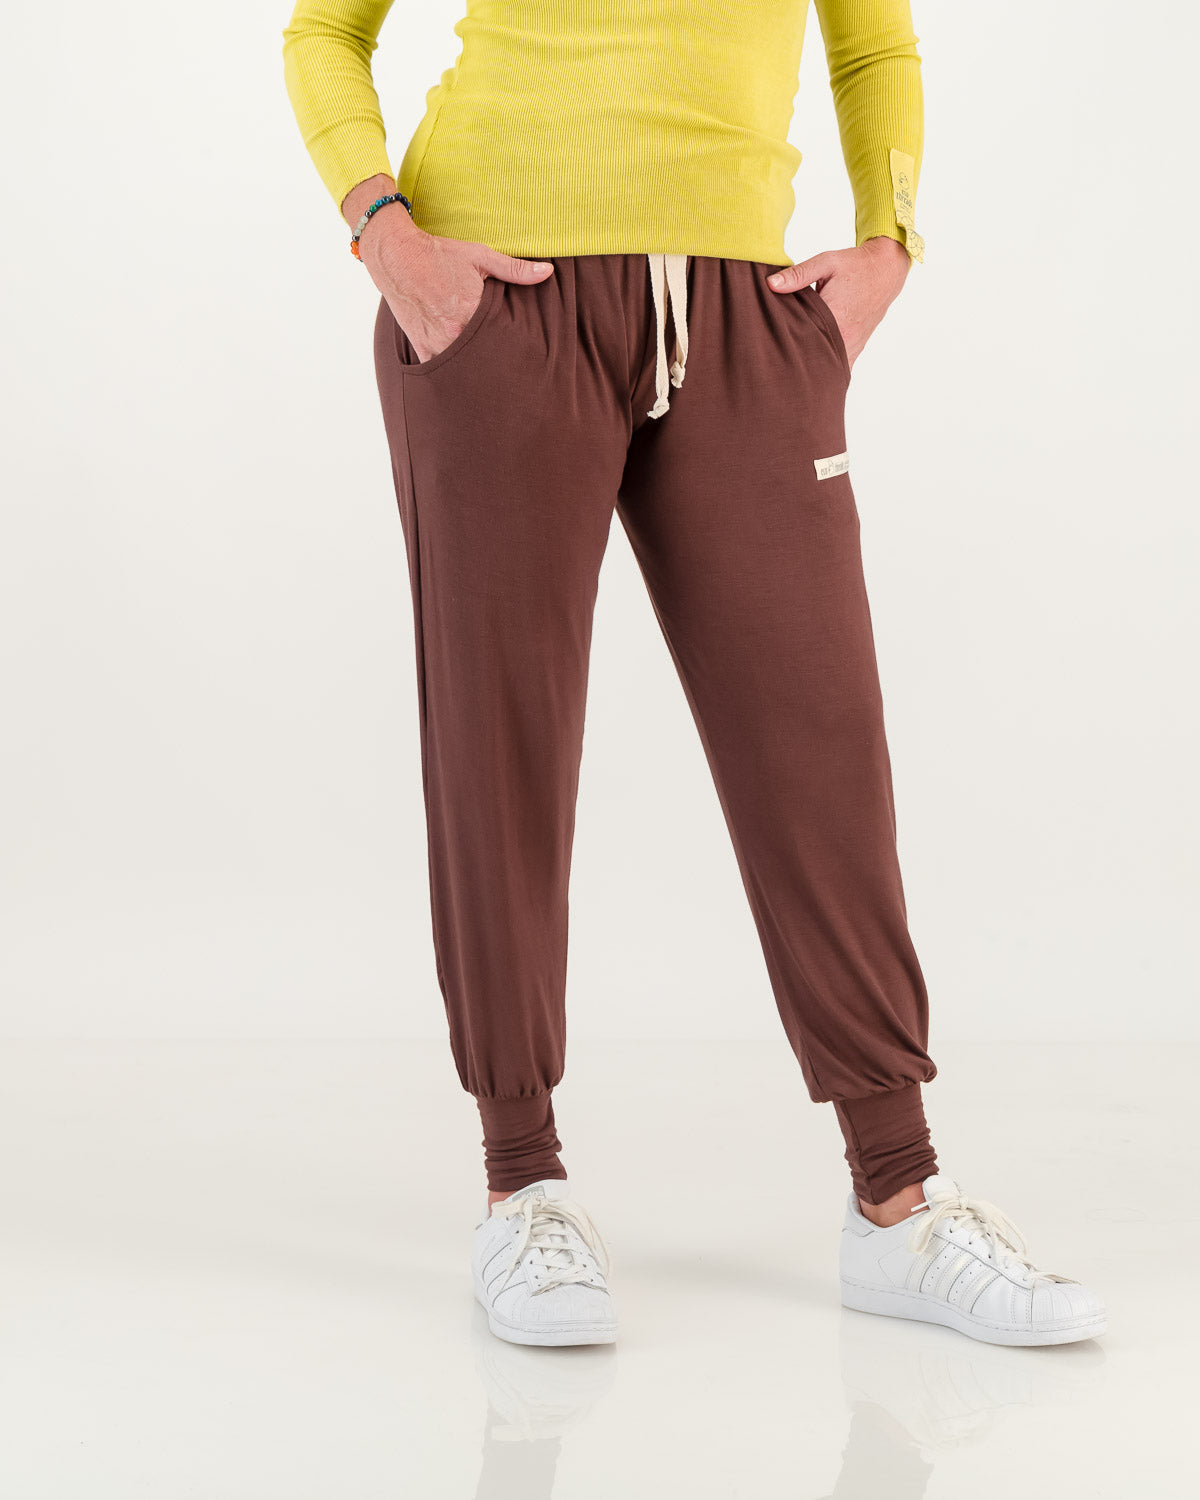 Comfy Pants - Chocolate – Eco Threads Clothing